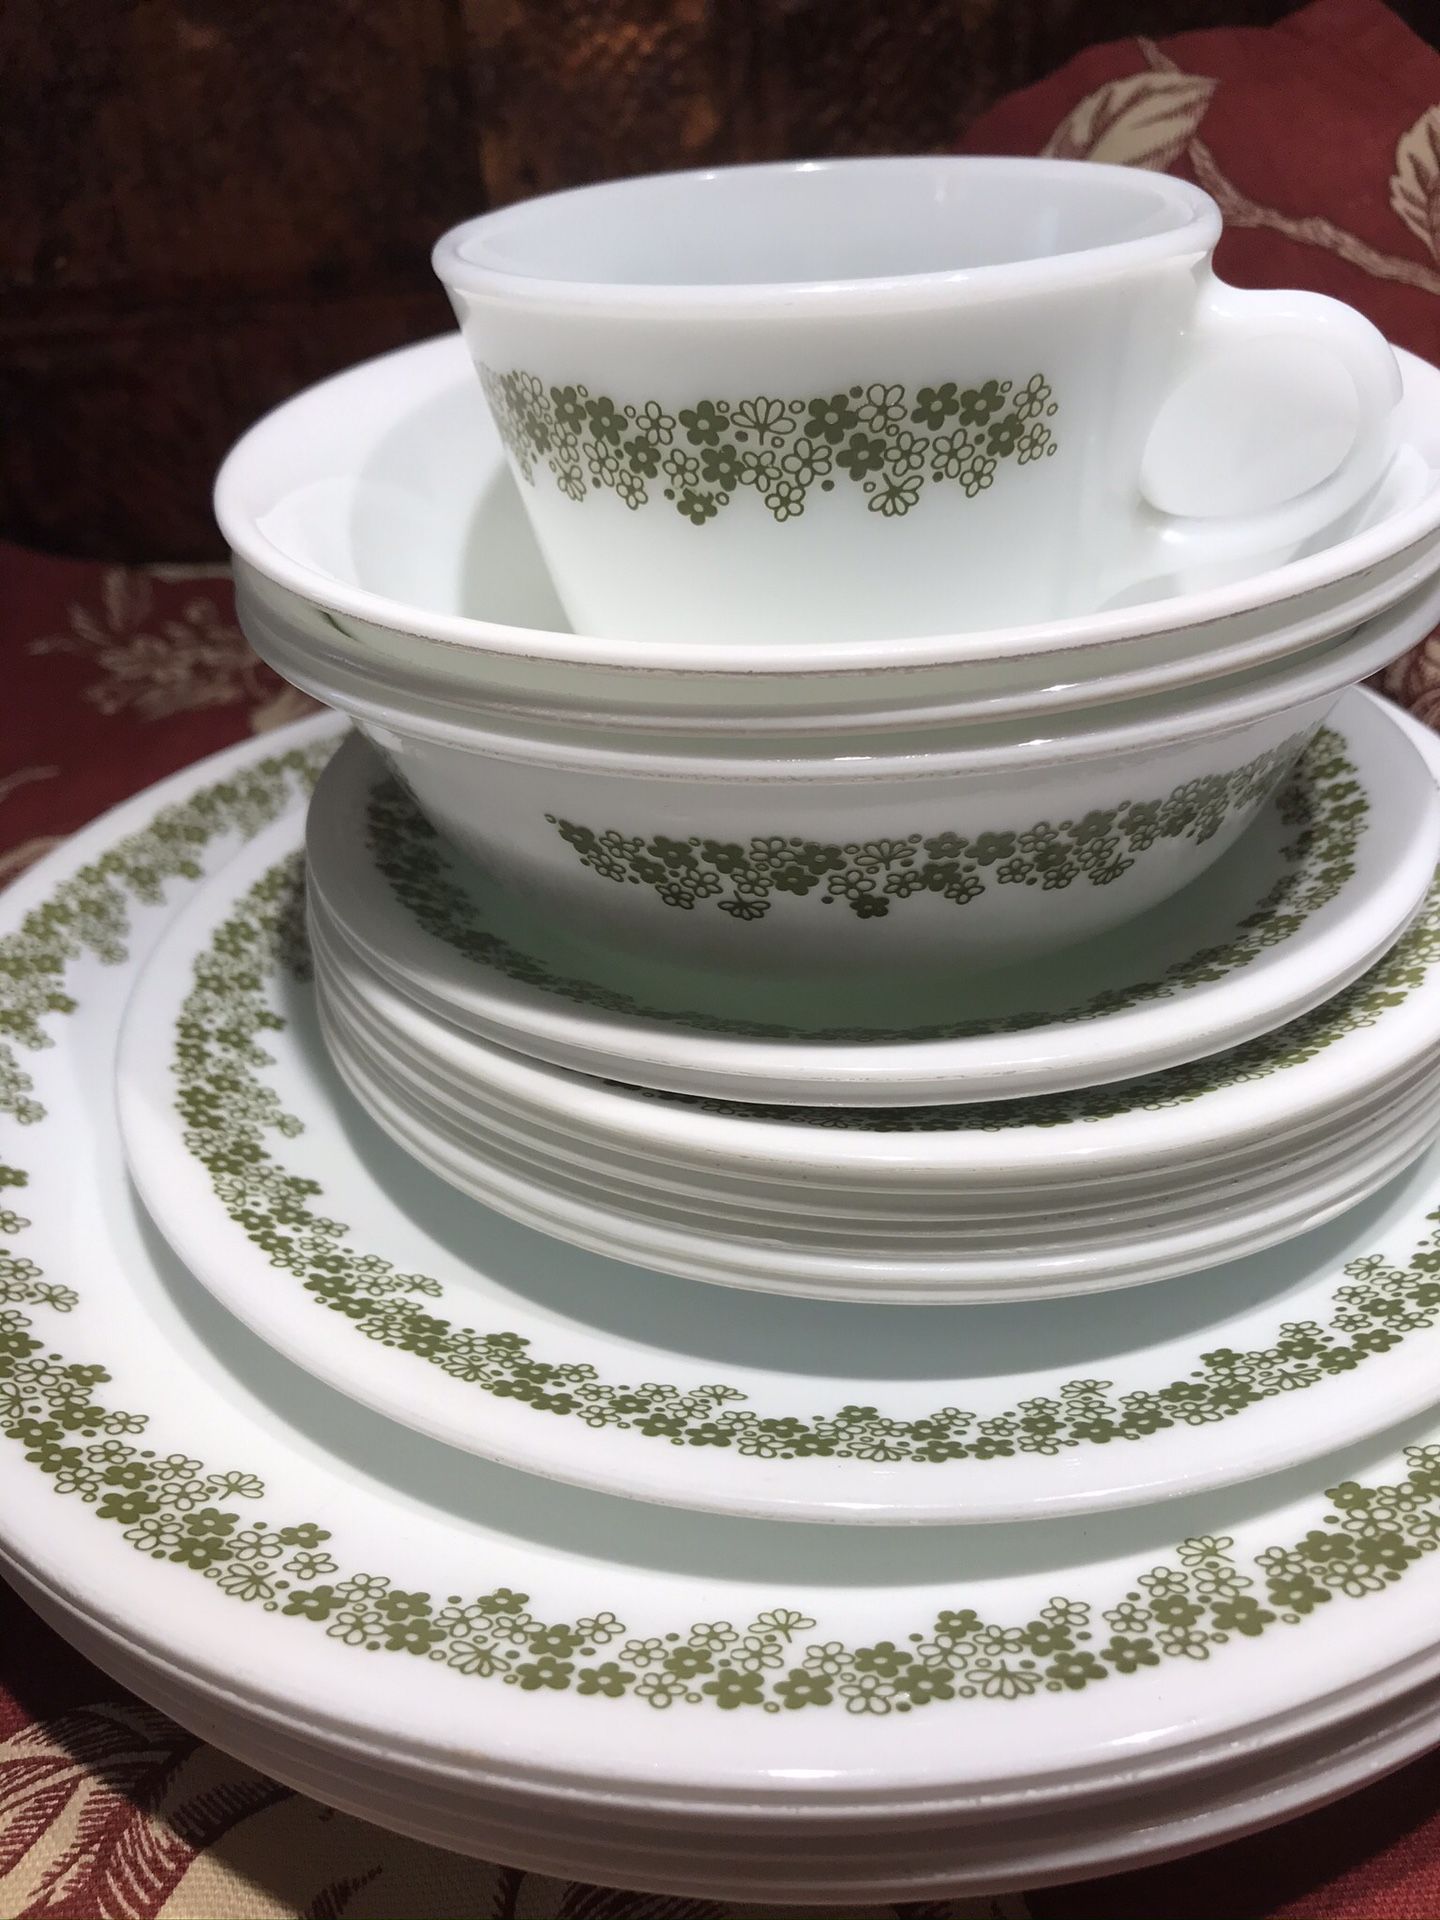 21 pc Corelle Lazy Daisy Dishes Plate Bowls Spring Blossom